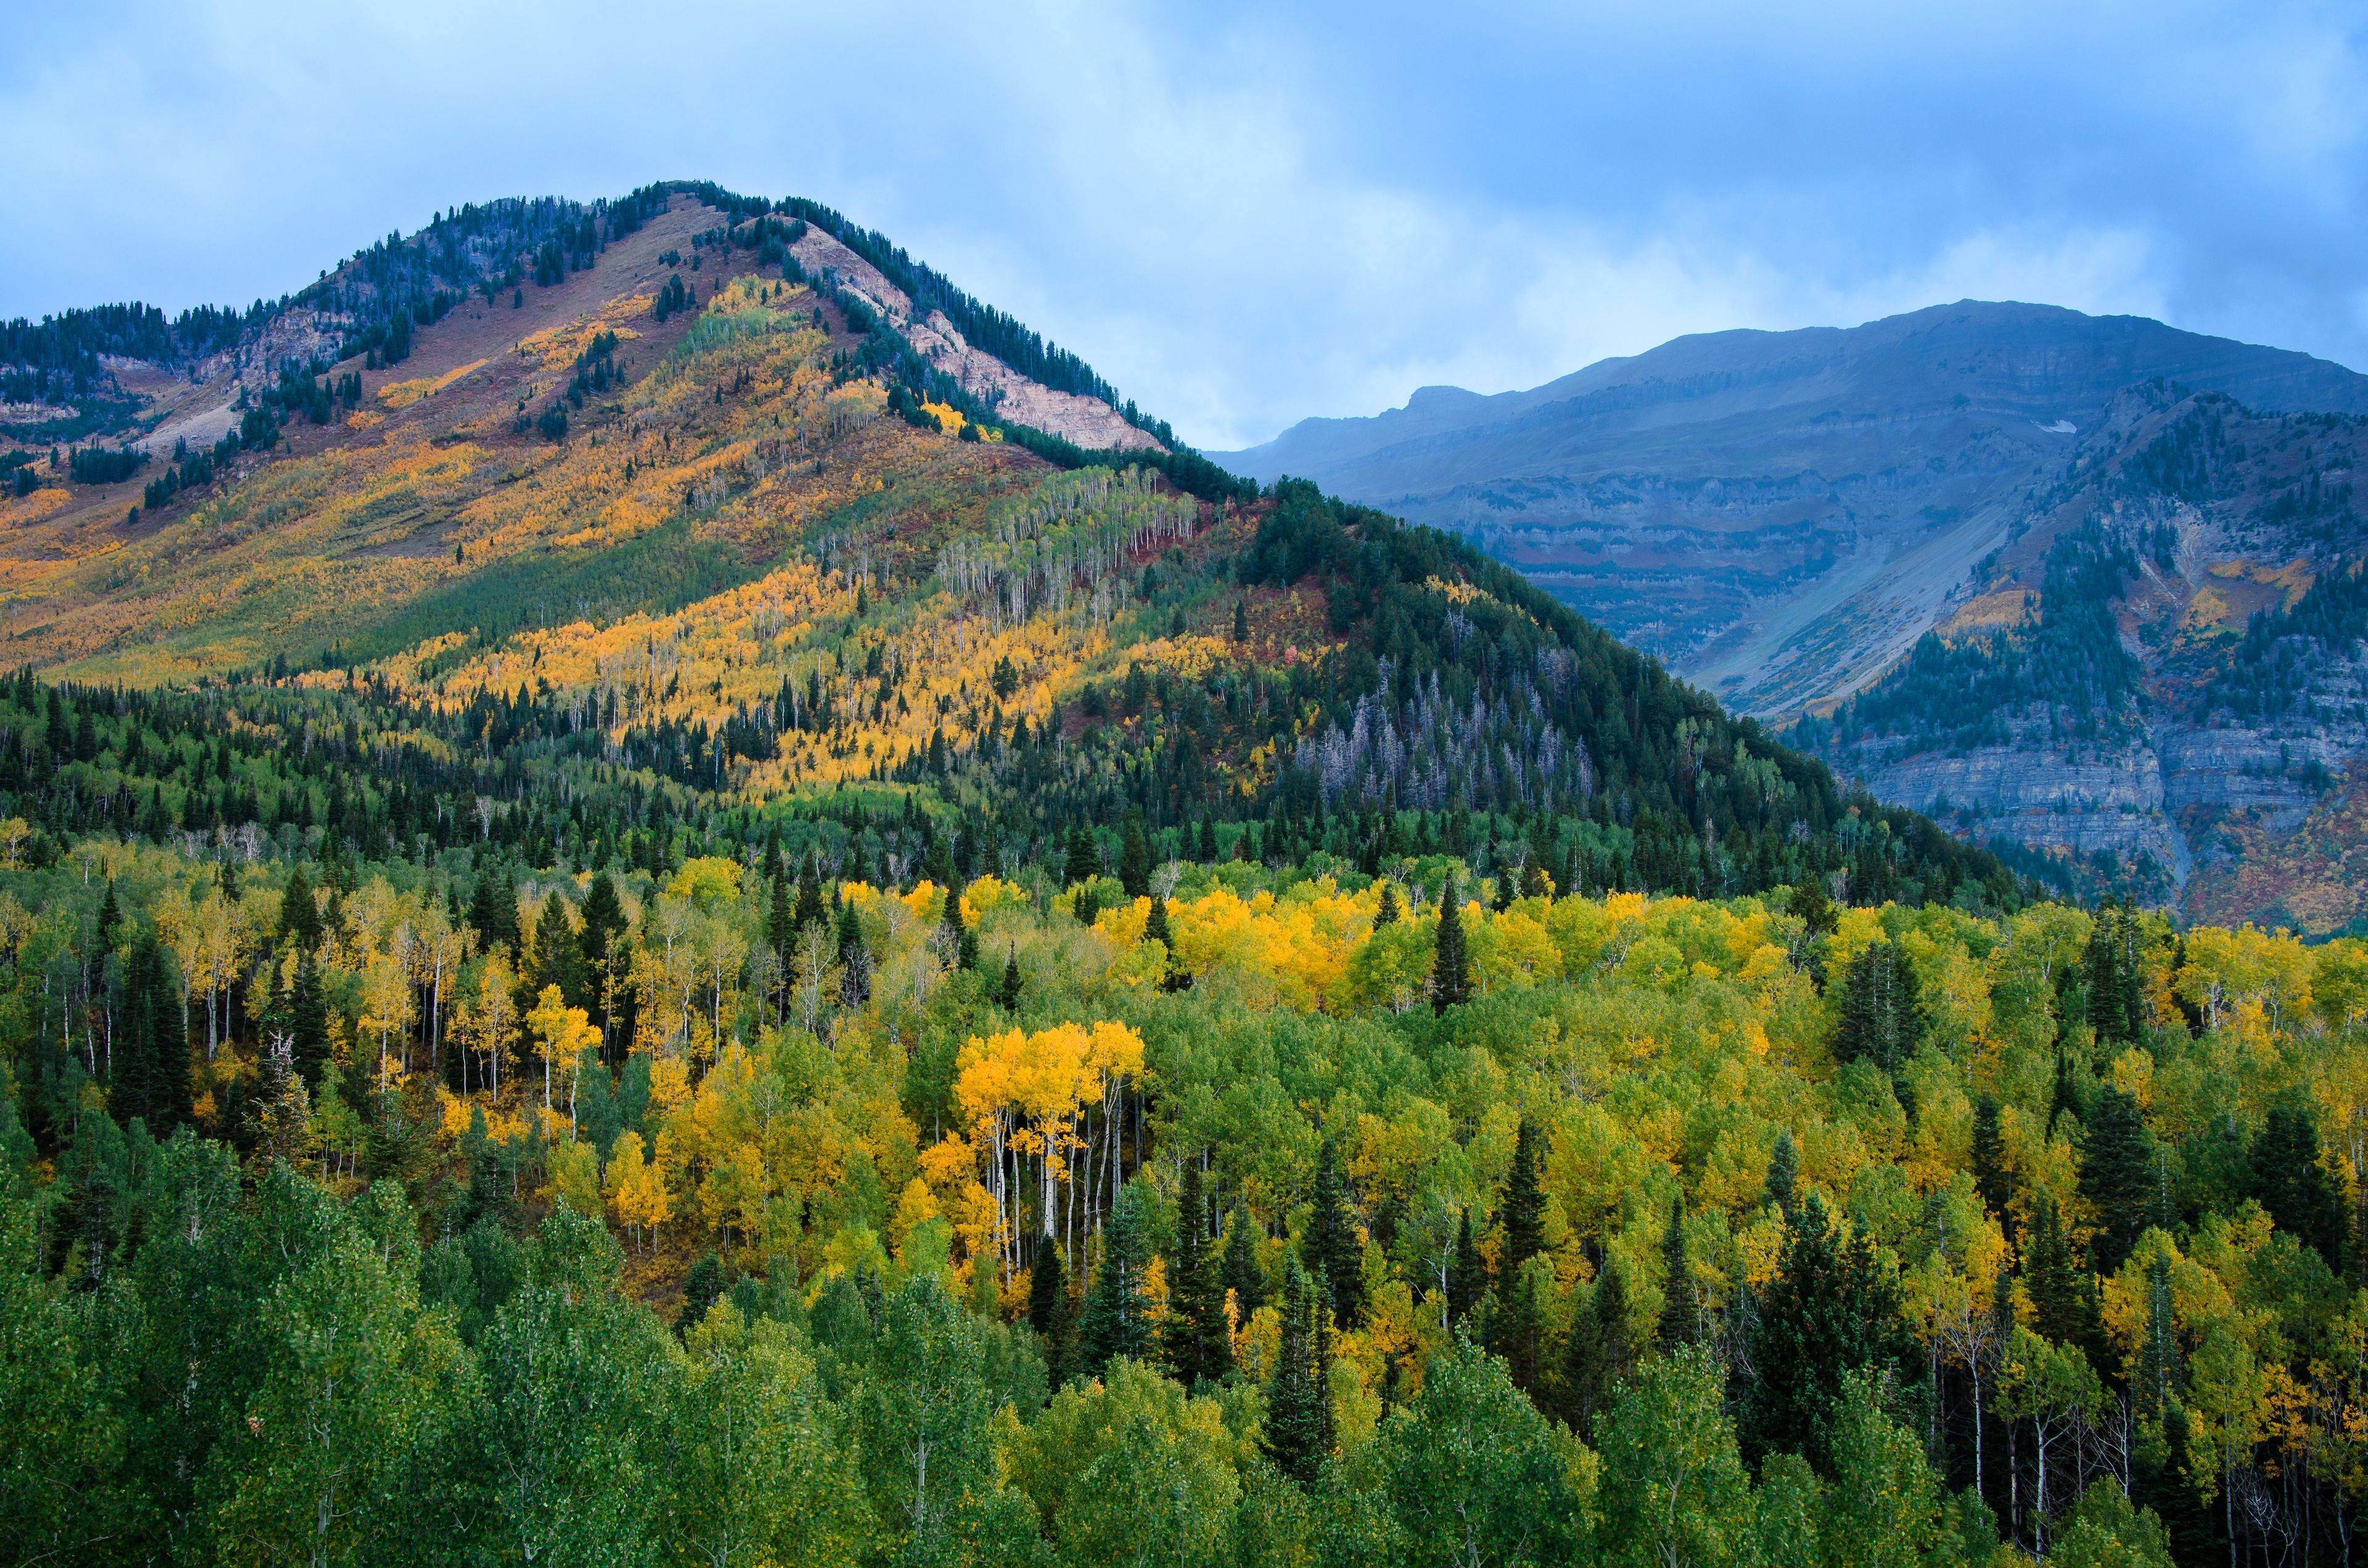 The Alpine Loop mountains covered in trees during the autumn season.